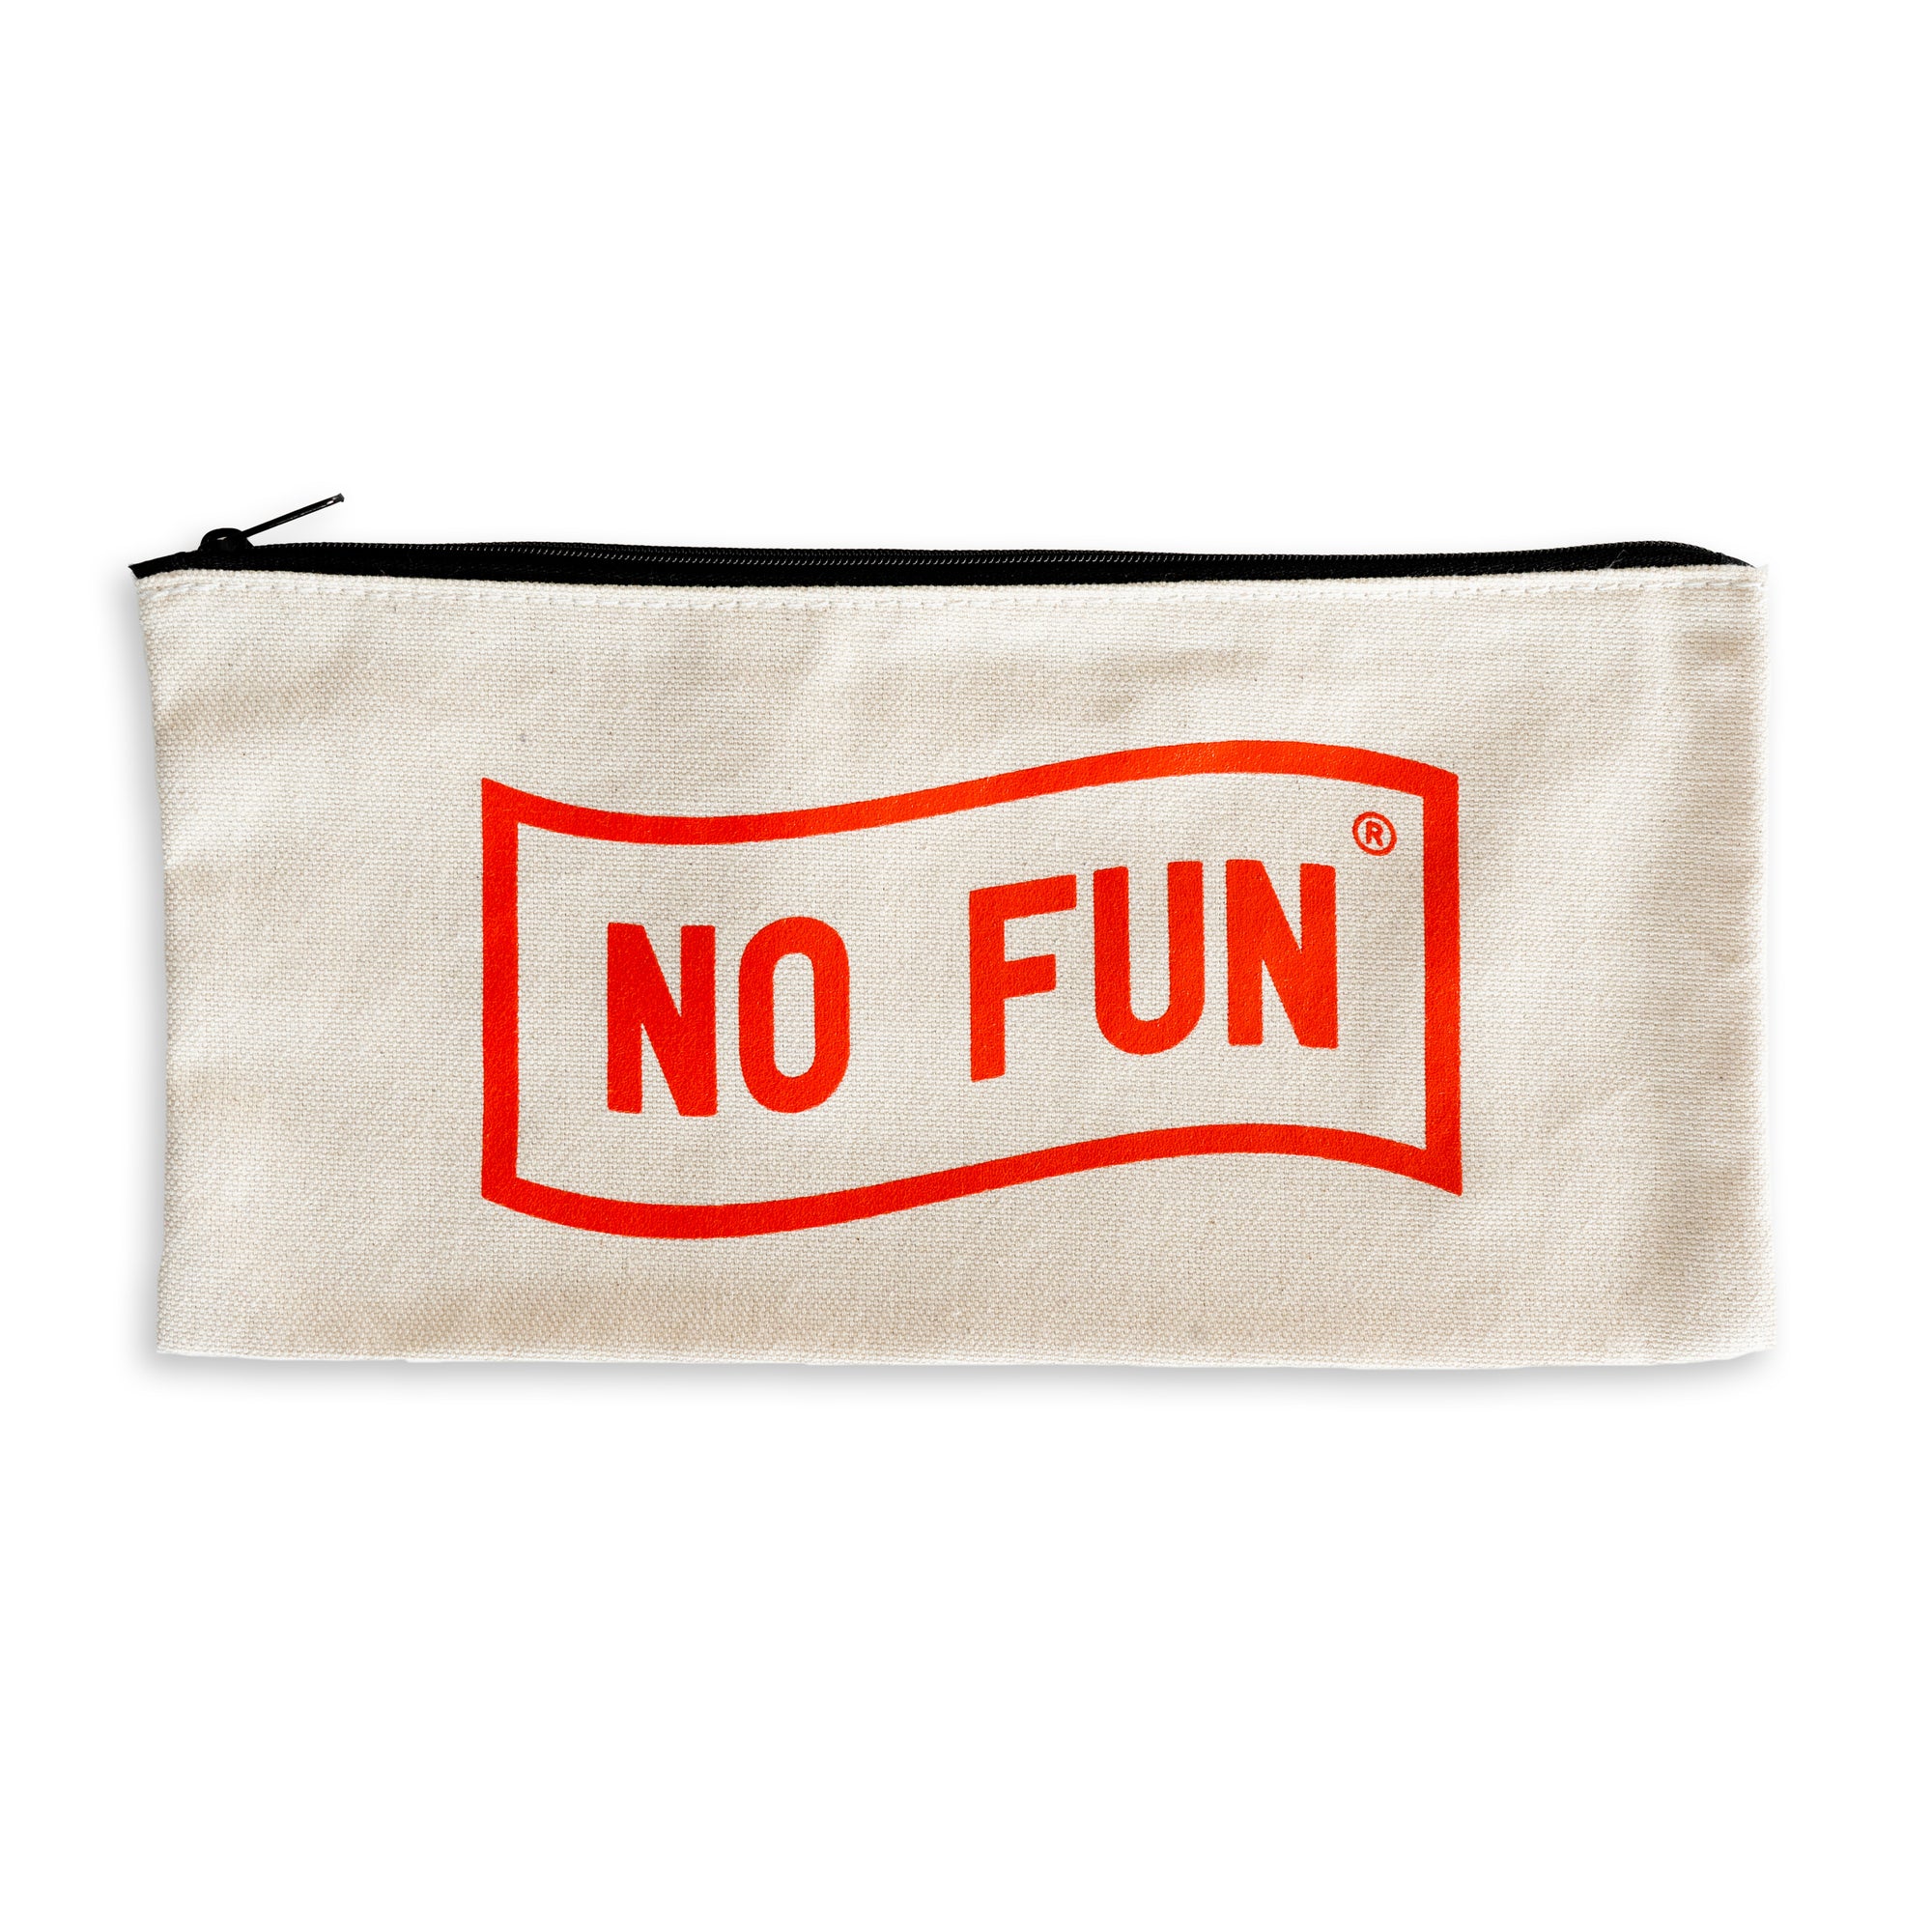 The Stash Pouch by No Fun®.  The pouch is canvas with a black zipper.  There is a large, red, No Fun® logo printed on one side.